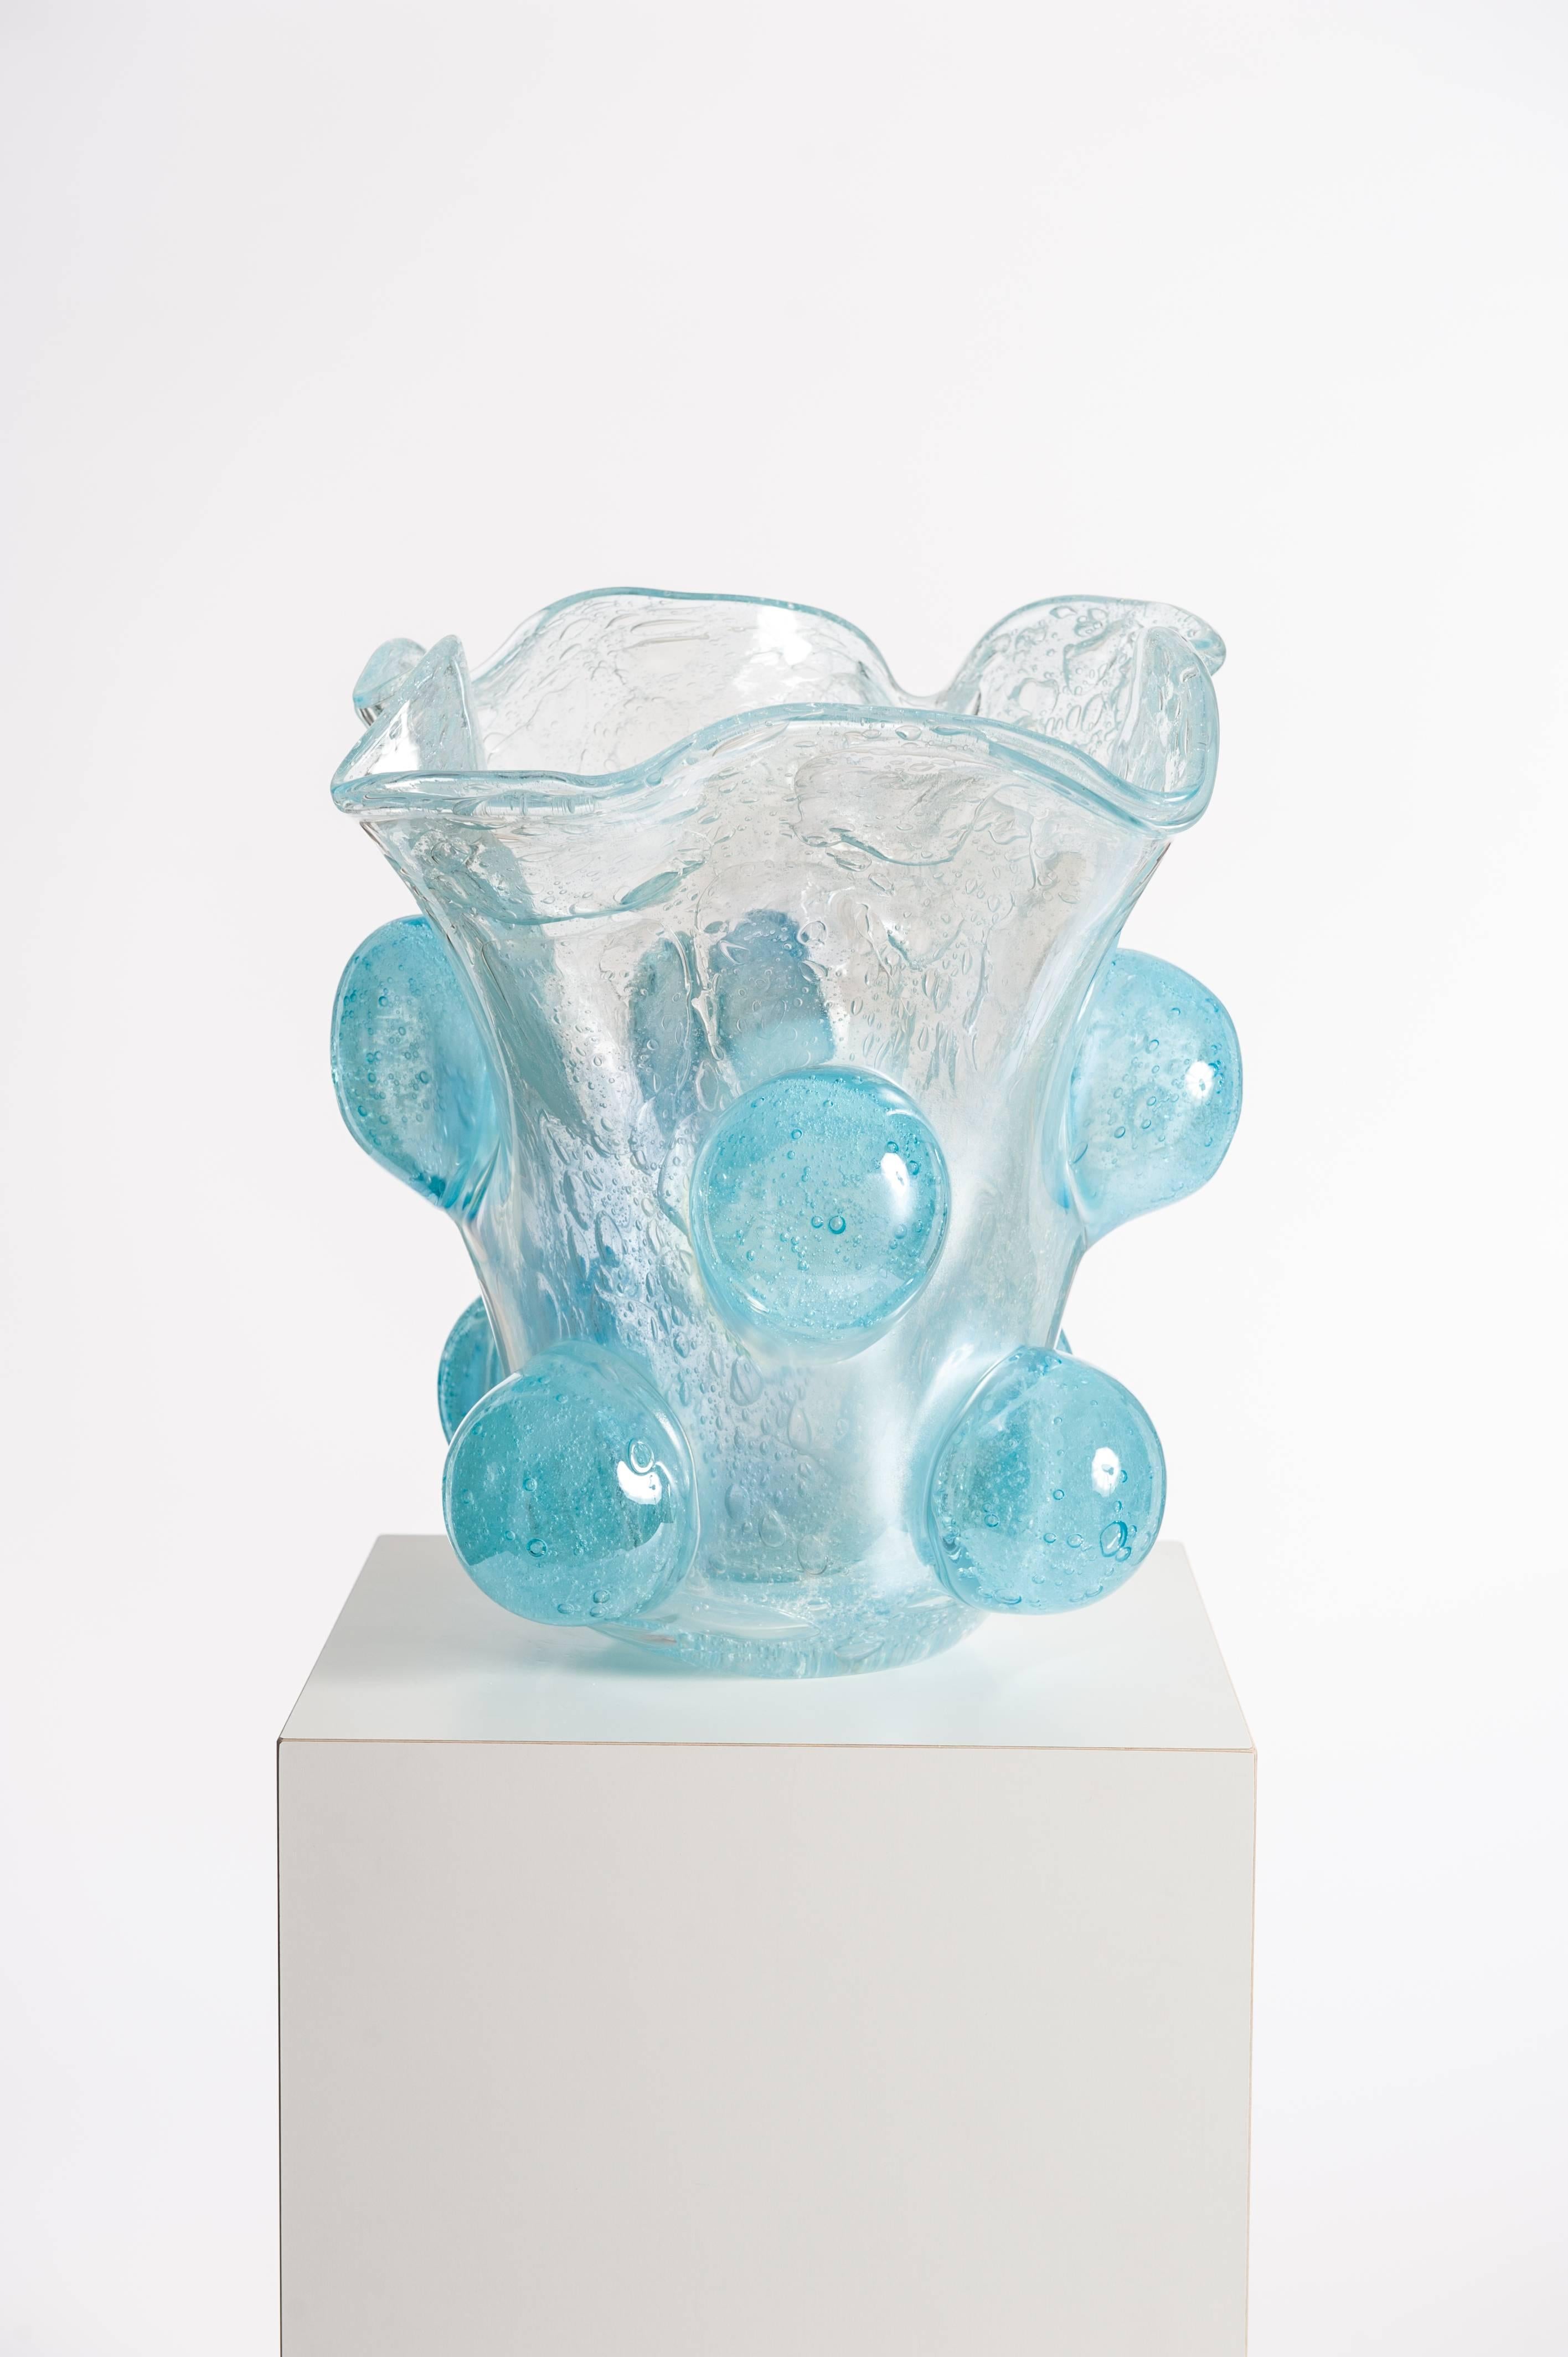 Hand-Crafted Modern Italian Murano Glass Vase Turquoise Colored with Surreal Impressional